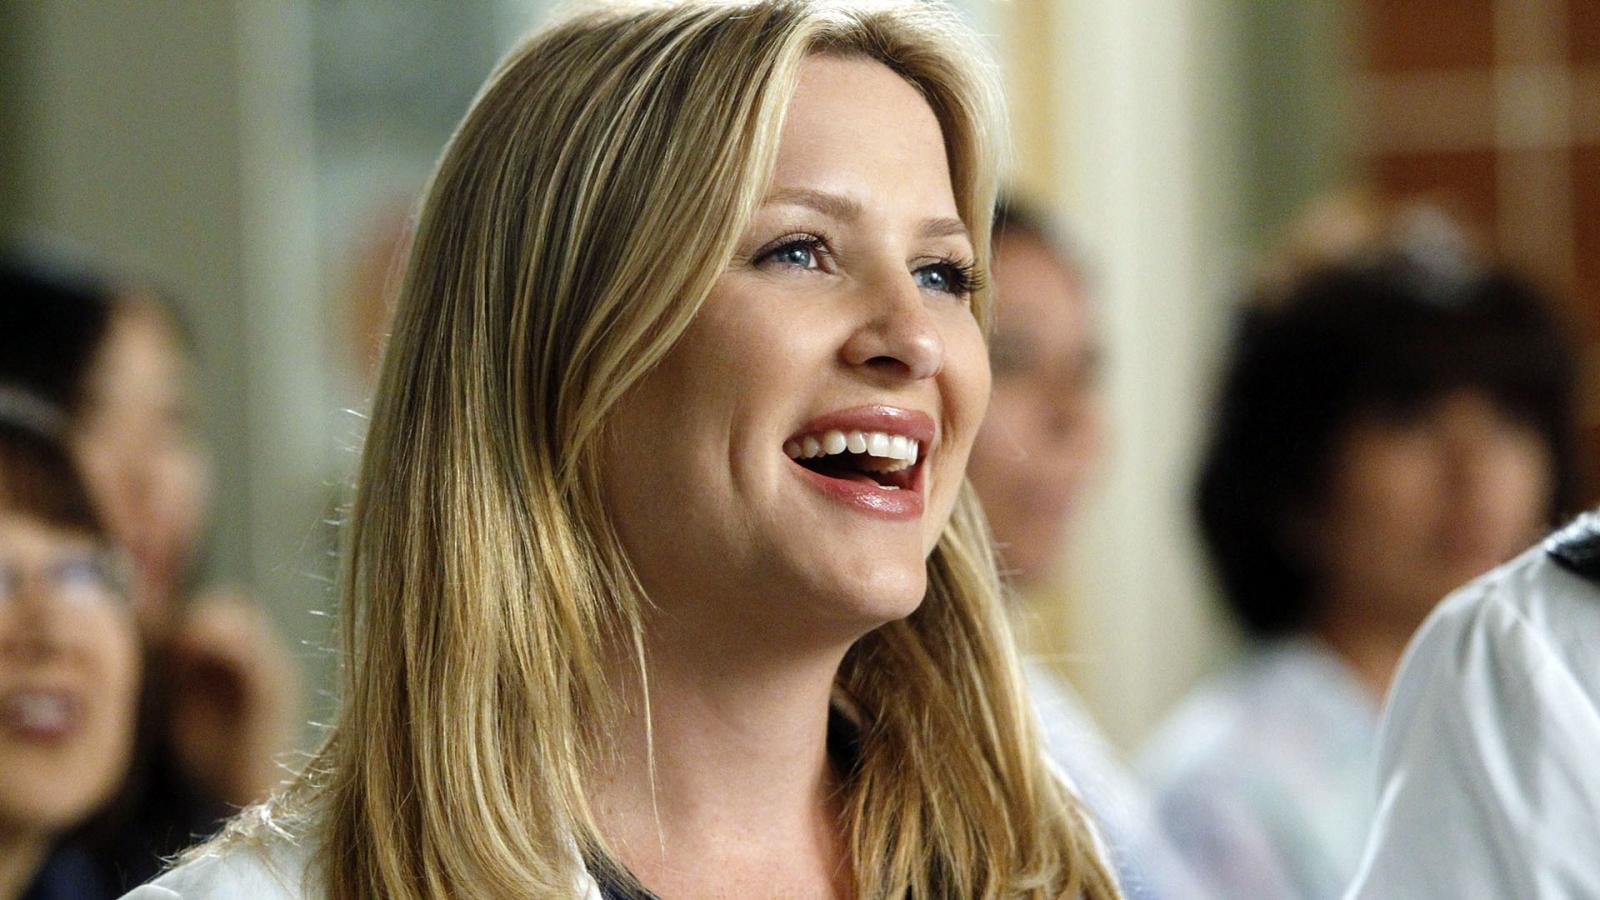 Which Grey's Anatomy Doctor Are You, Based on Your Zodiac Sign? - image 3